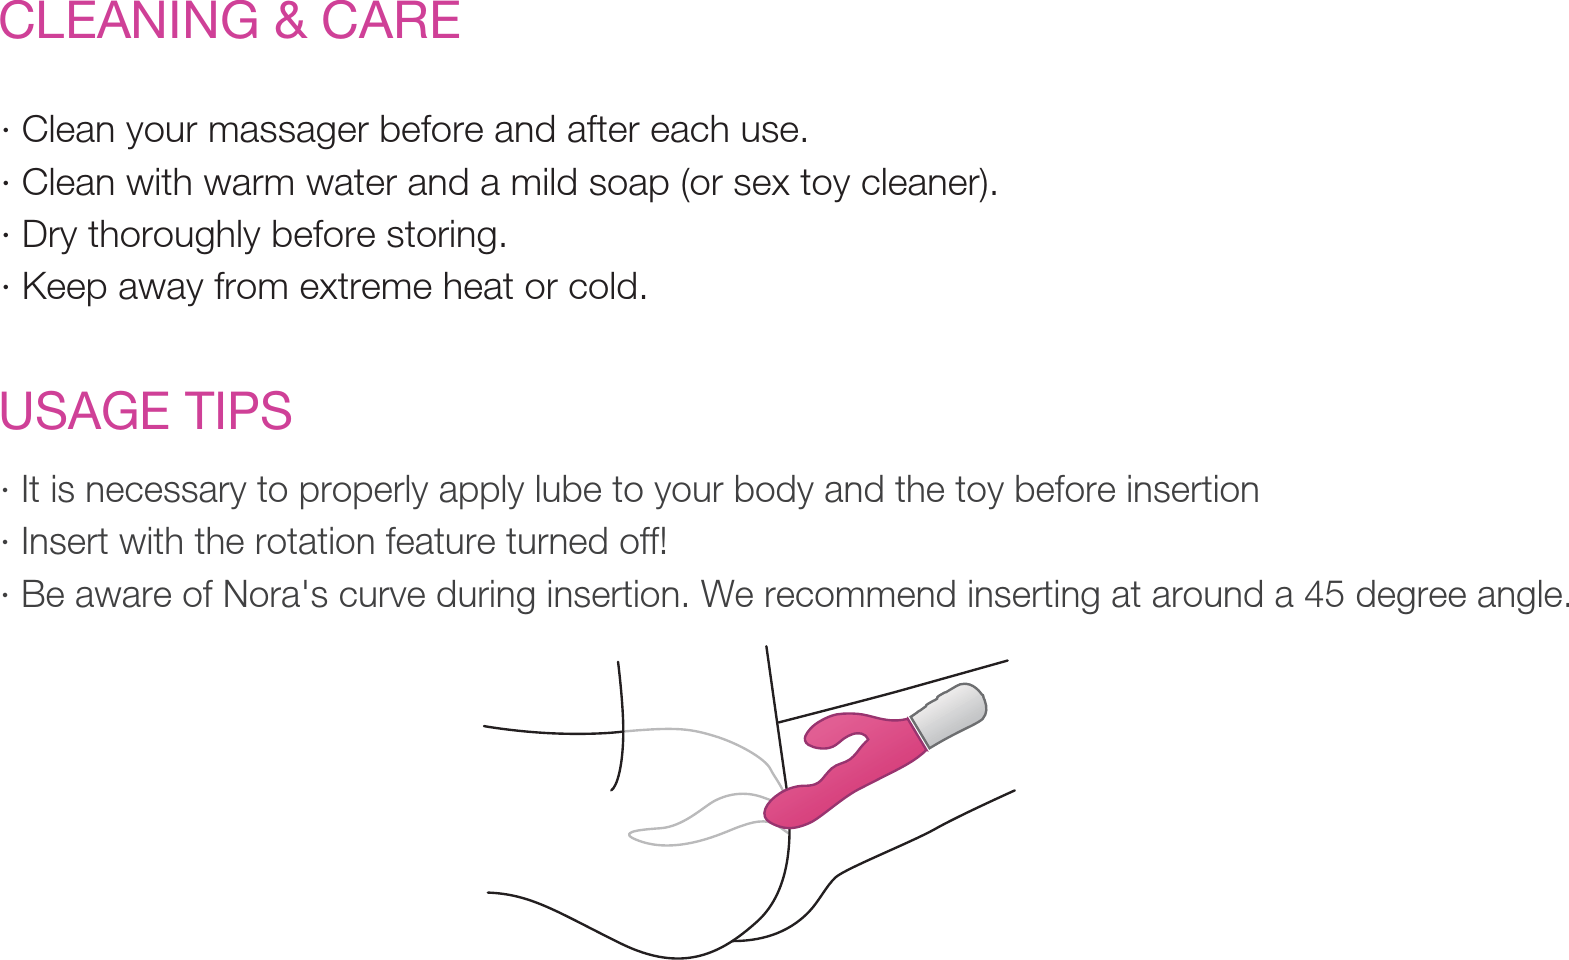 CLEANING &amp; CARE· Clean your massager before and after each use. · Clean with warm water and a mild soap (or sex toy cleaner). · Dry thoroughly before storing.· Keep away from extreme heat or cold. · It is necessary to properly apply lube to your body and the toy before insertion· Insert with the rotation feature turned off!· Be aware of Nora&apos;s curve during insertion. We recommend inserting at around a 45 degree angle.USAGE TIPS